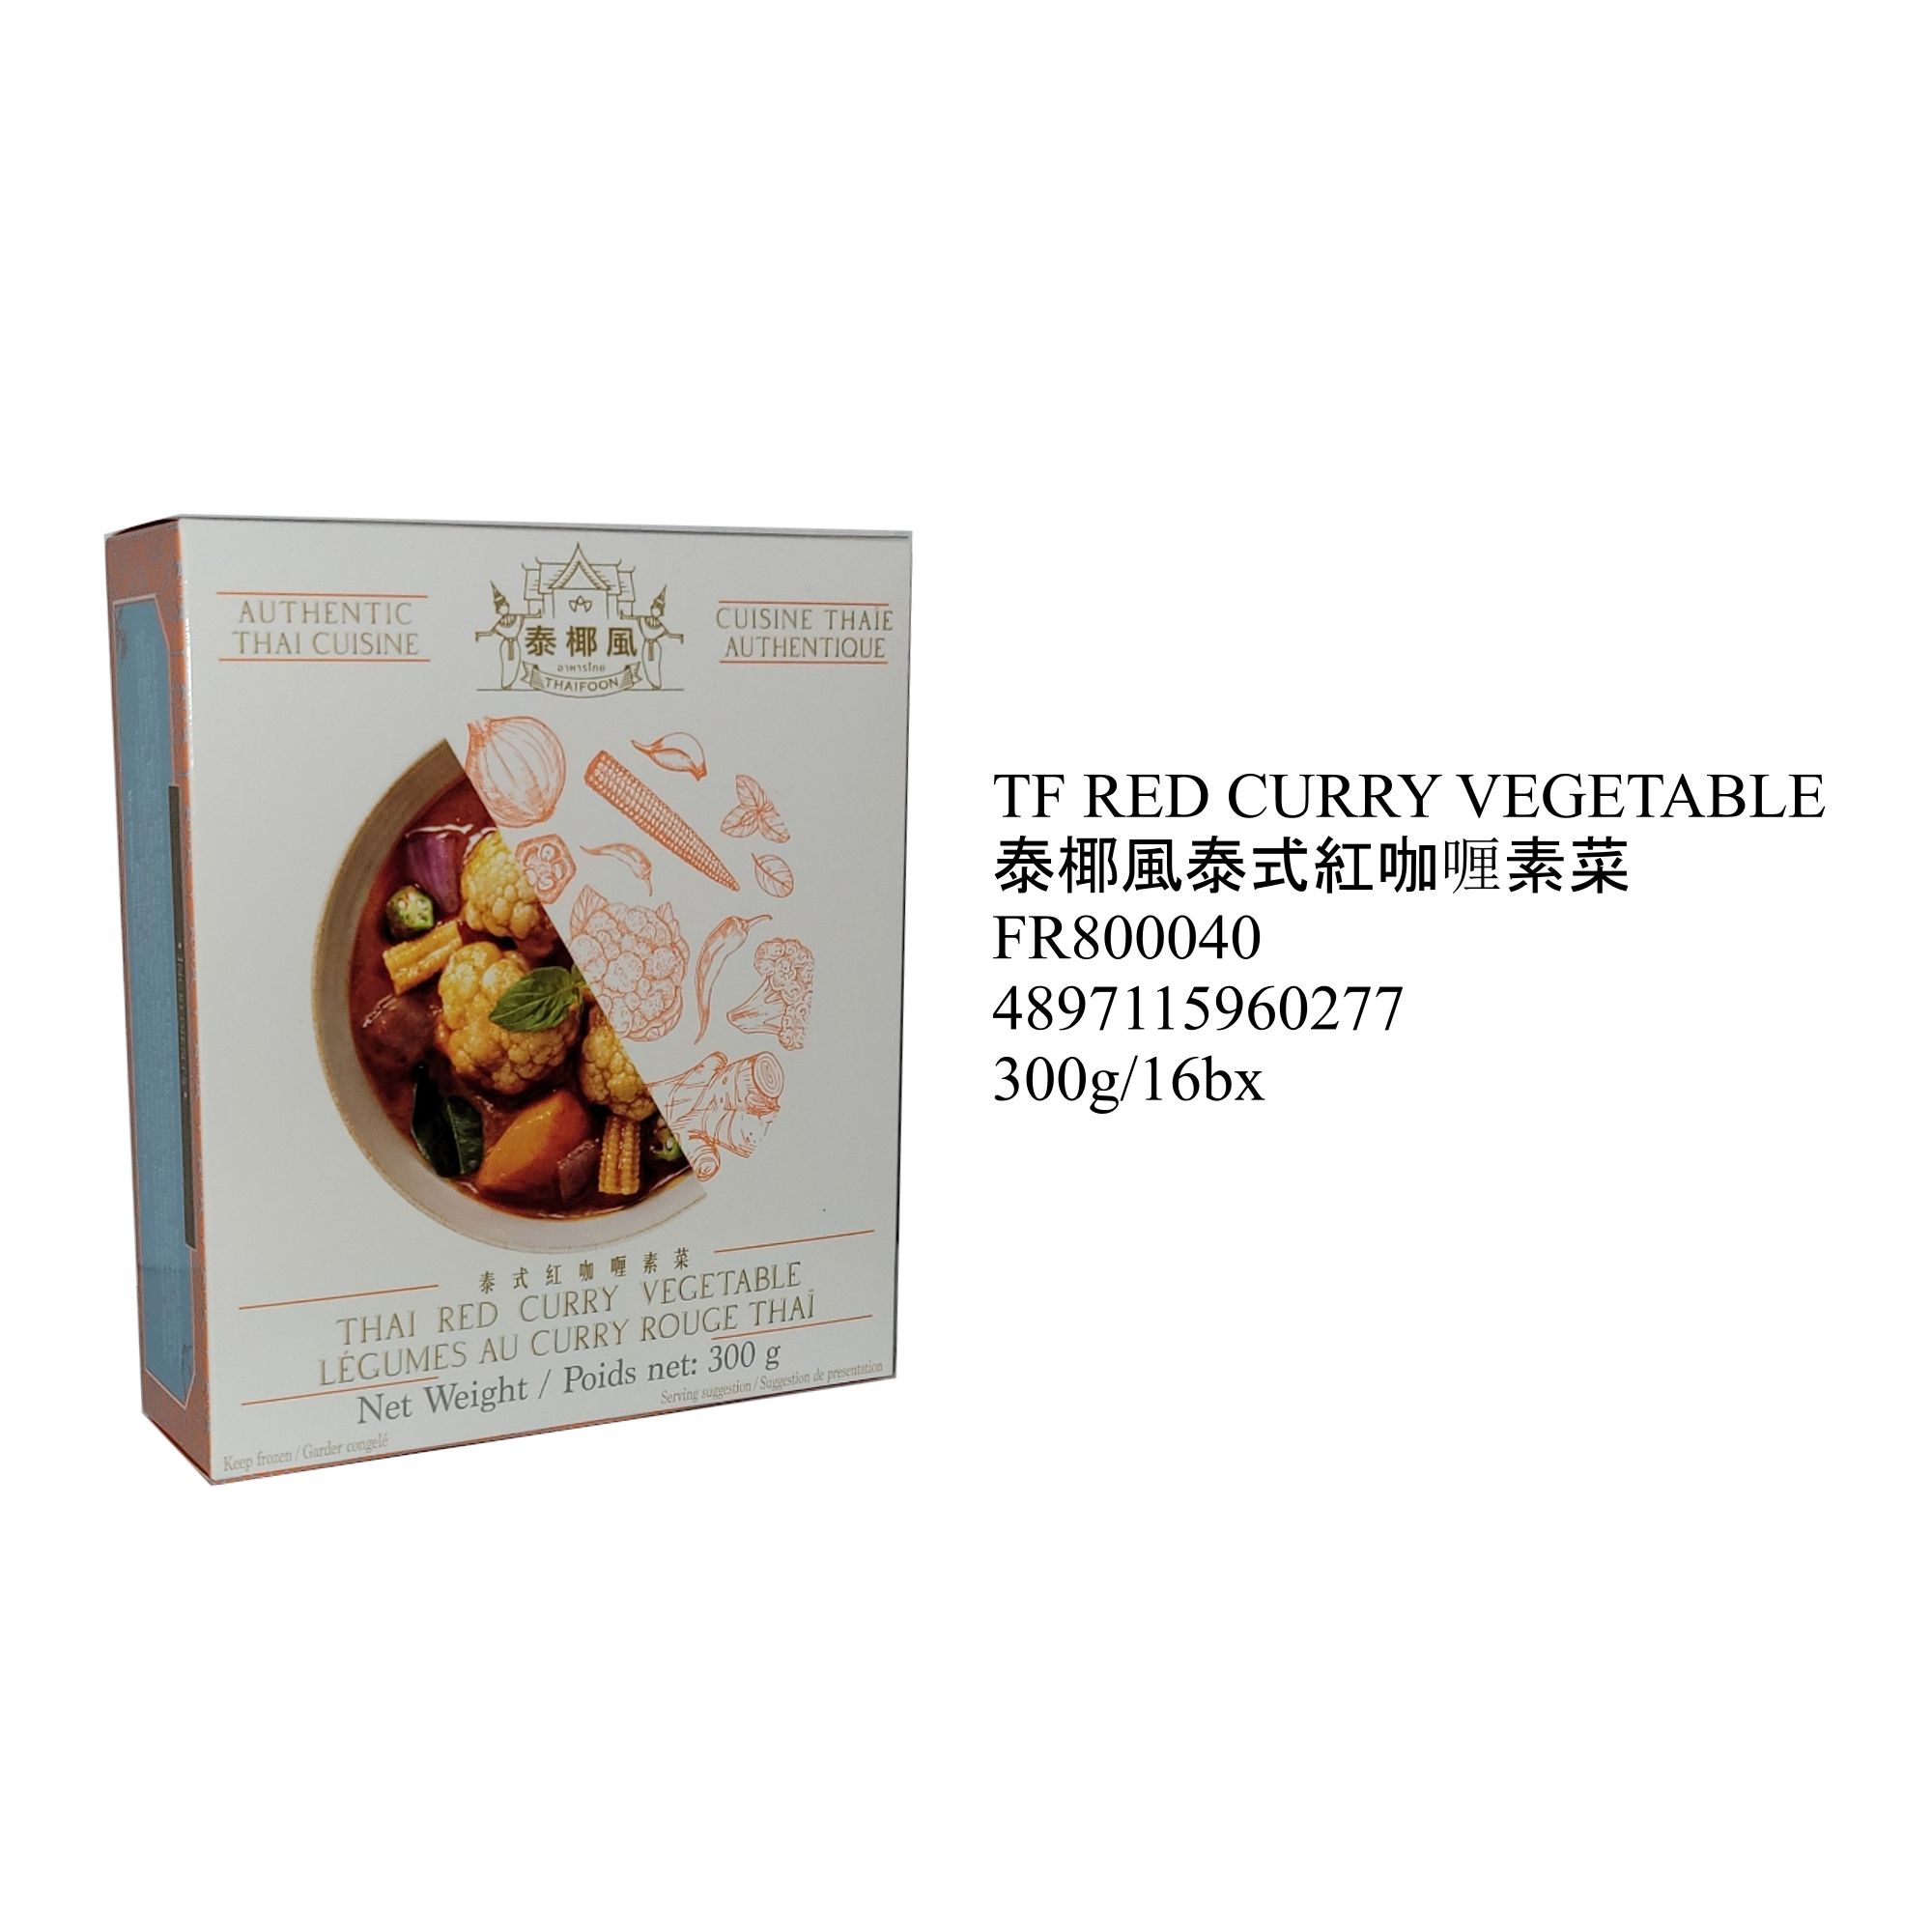 TF RED CURRY VEGETABLE FR800040